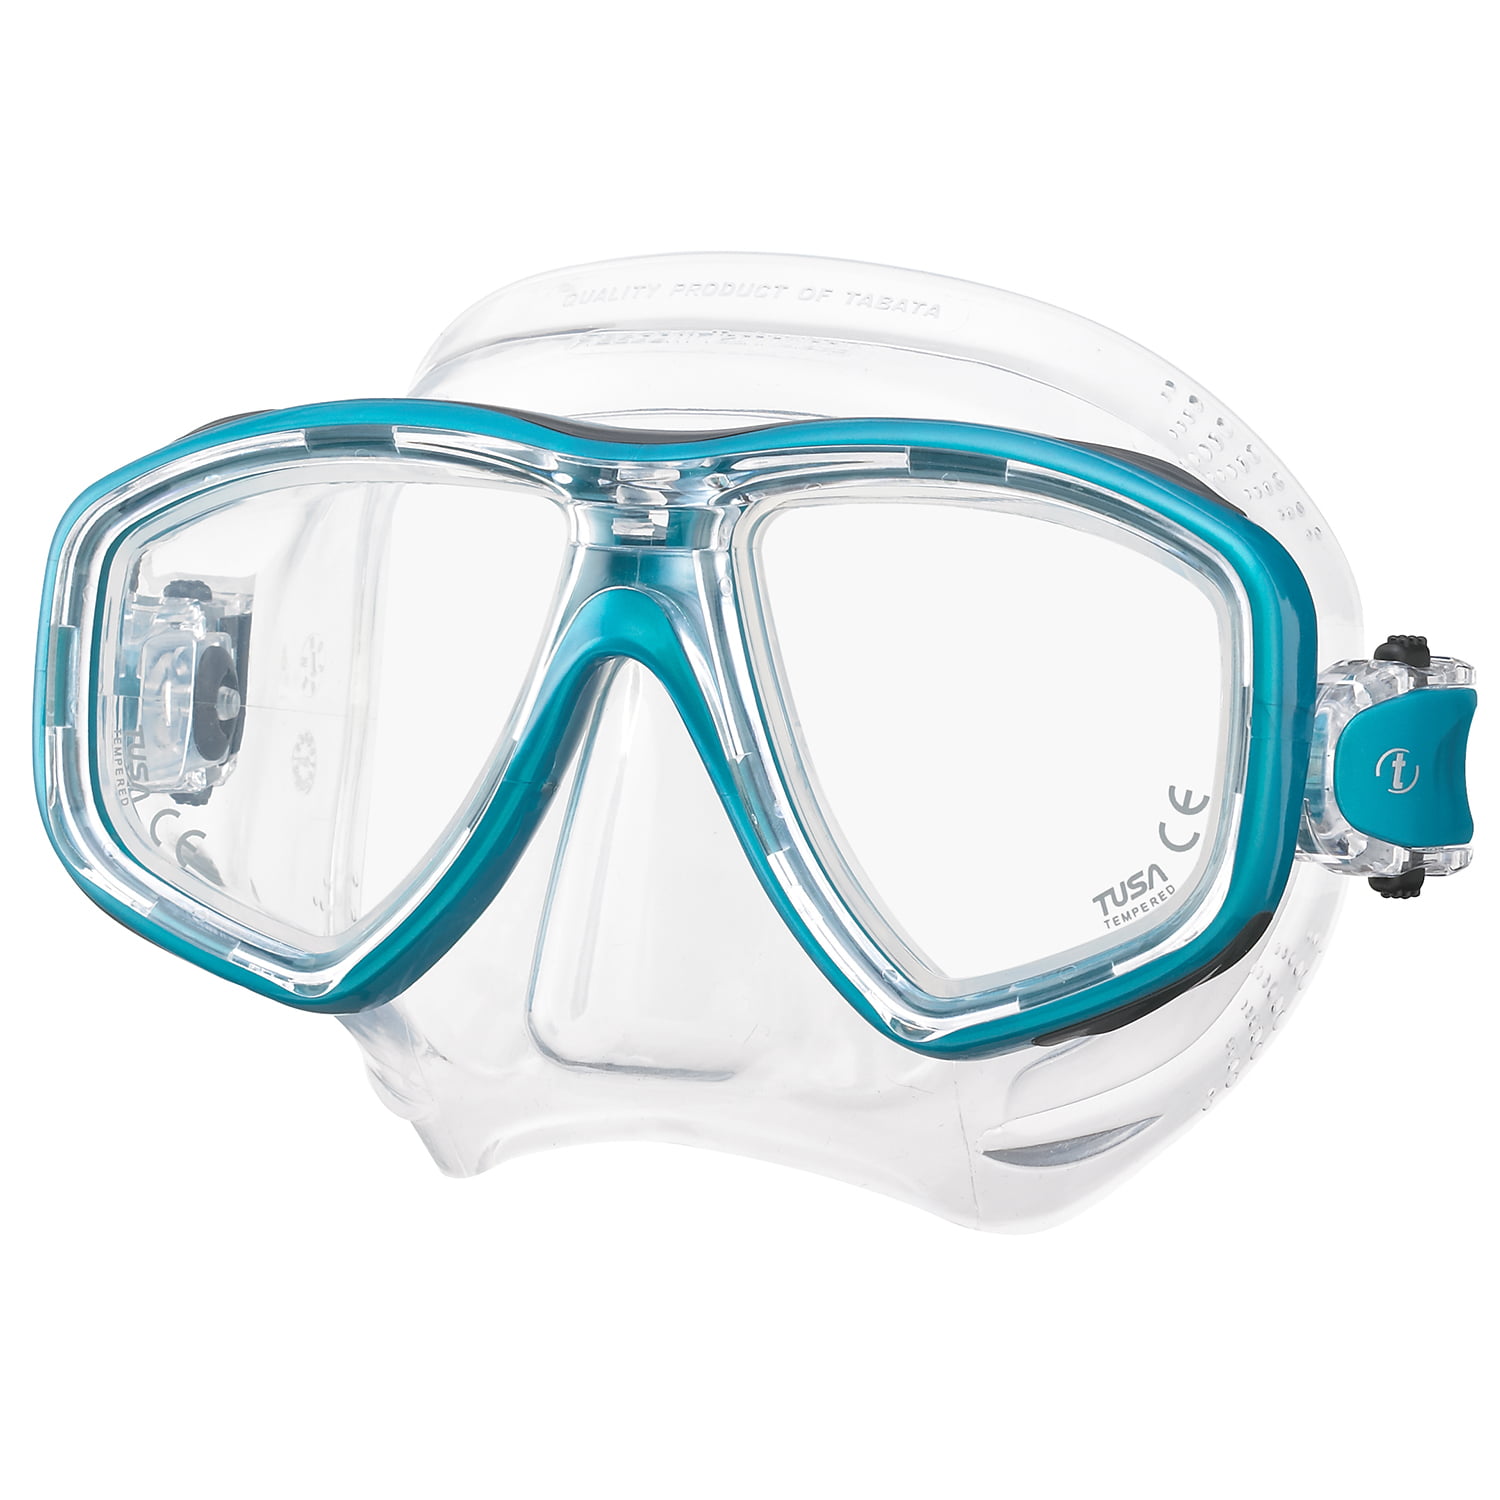 TUSA Freedom Ceos Scuba, Snorkel Mask with Freedom Fit Technology ...